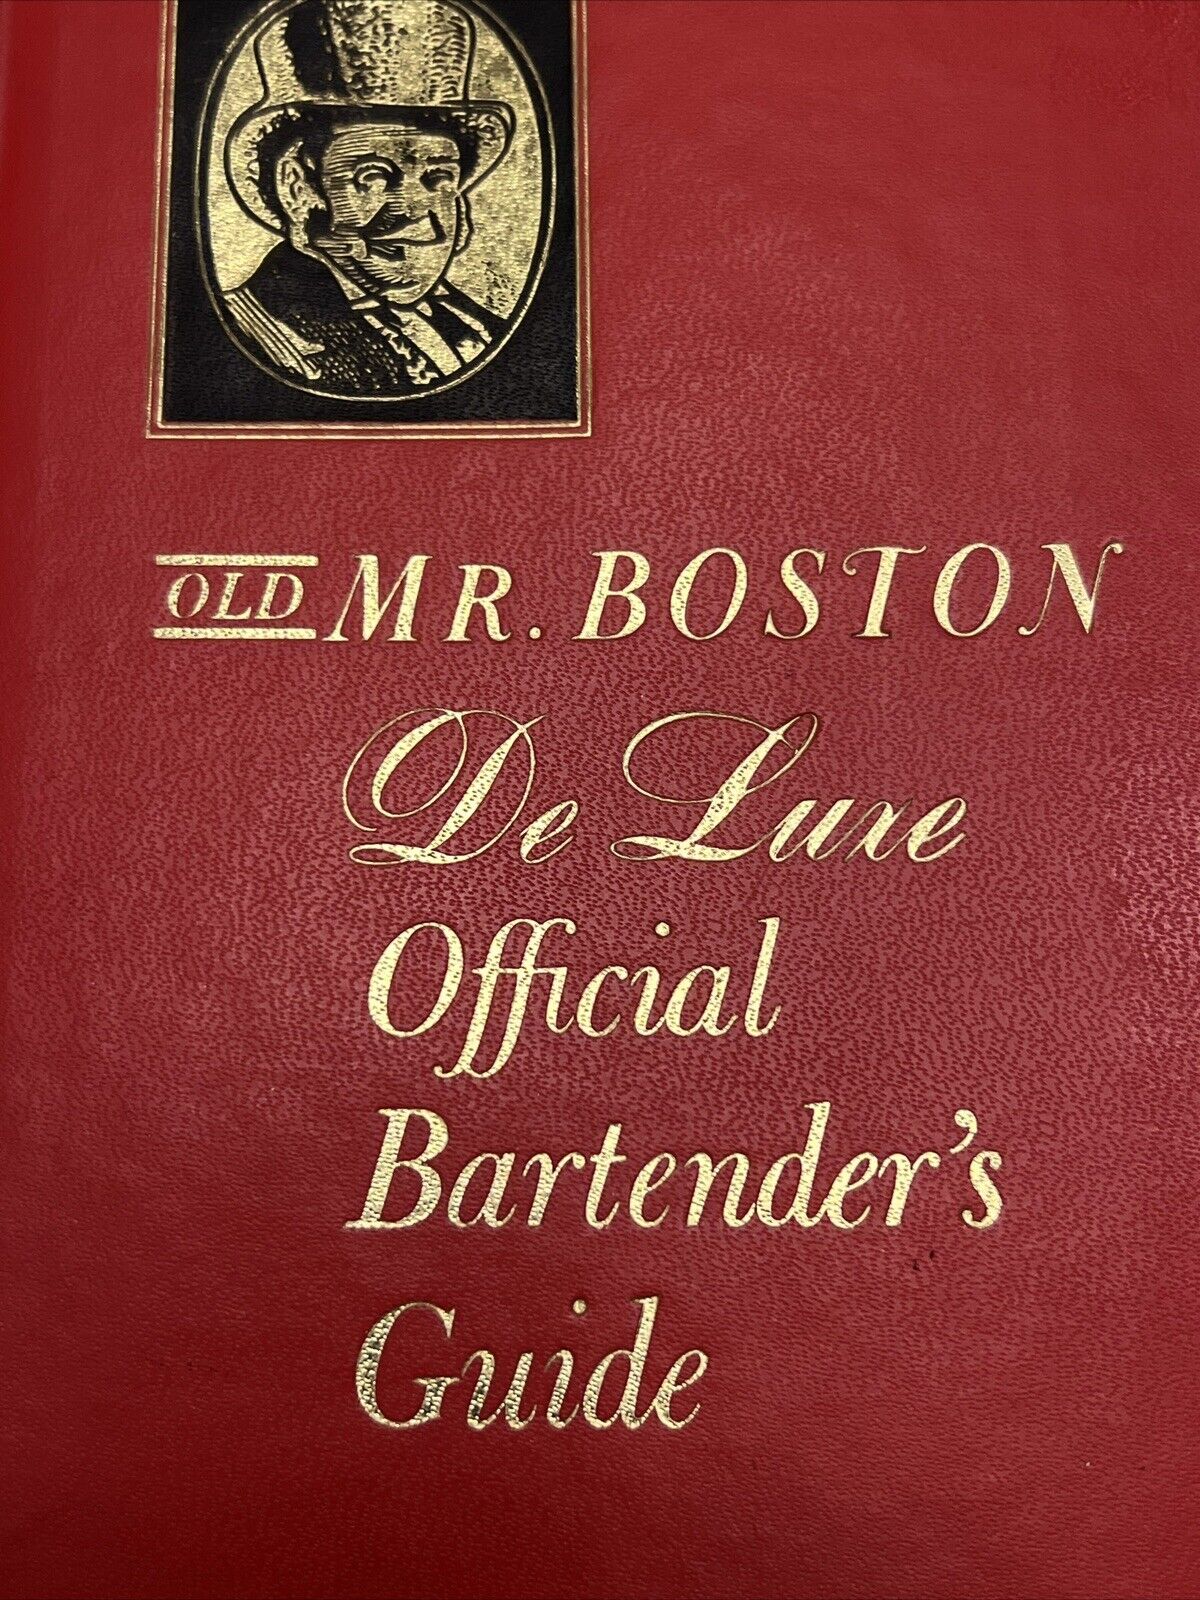 Vintage 1962 Old Mr. Boston Deluxe Official Bartender\'s Guide Book - Great Cond.